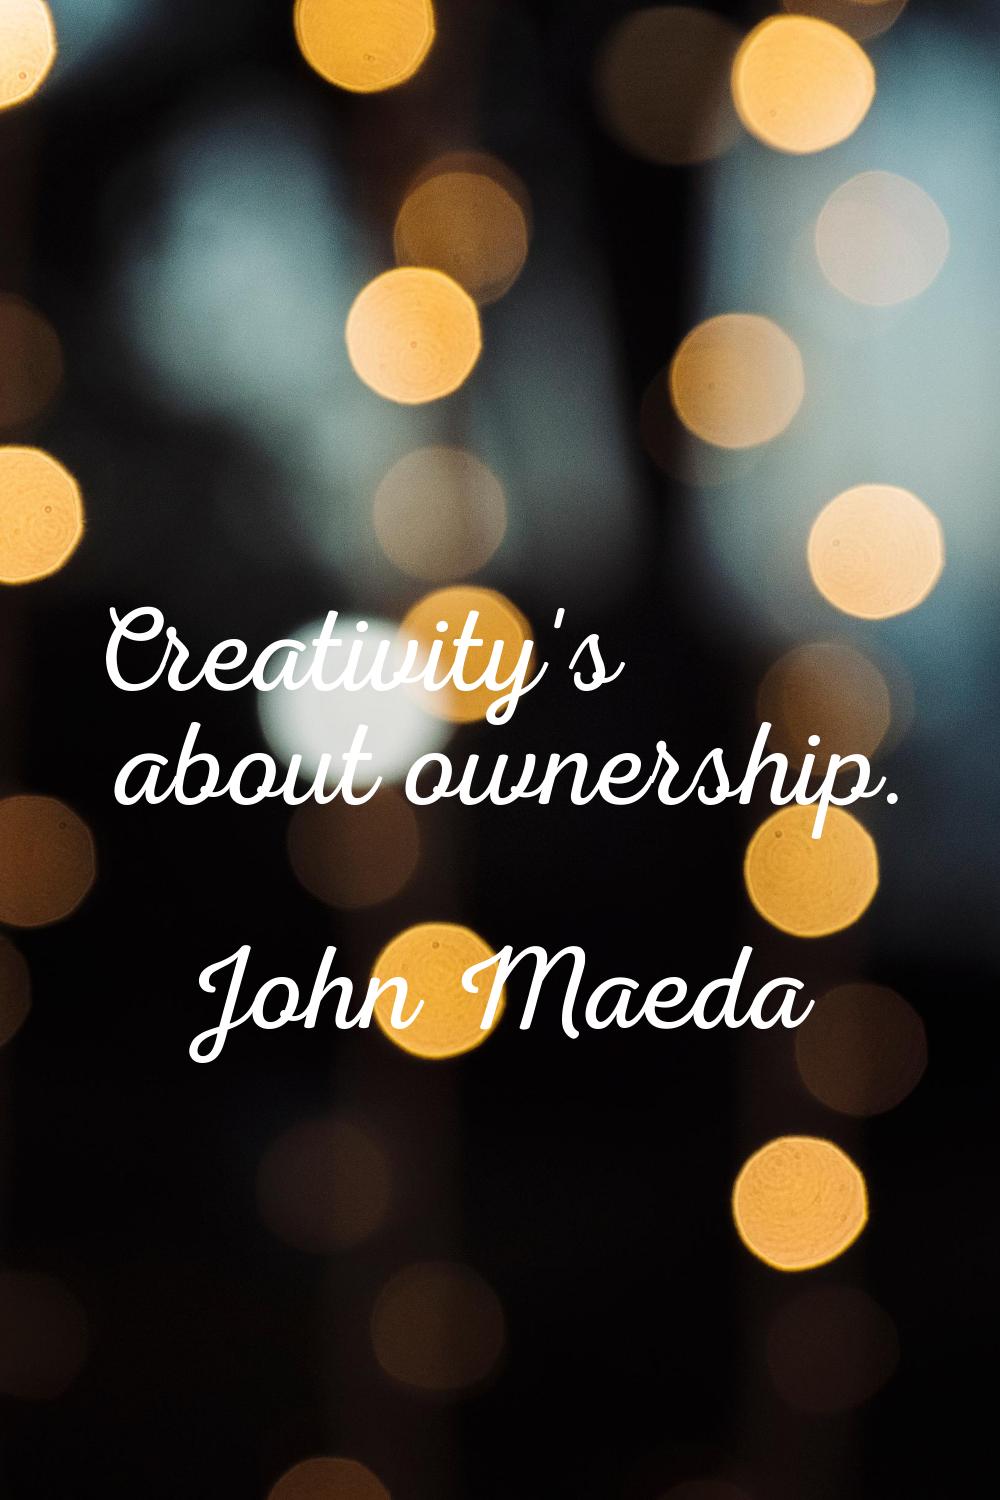 Creativity's about ownership.